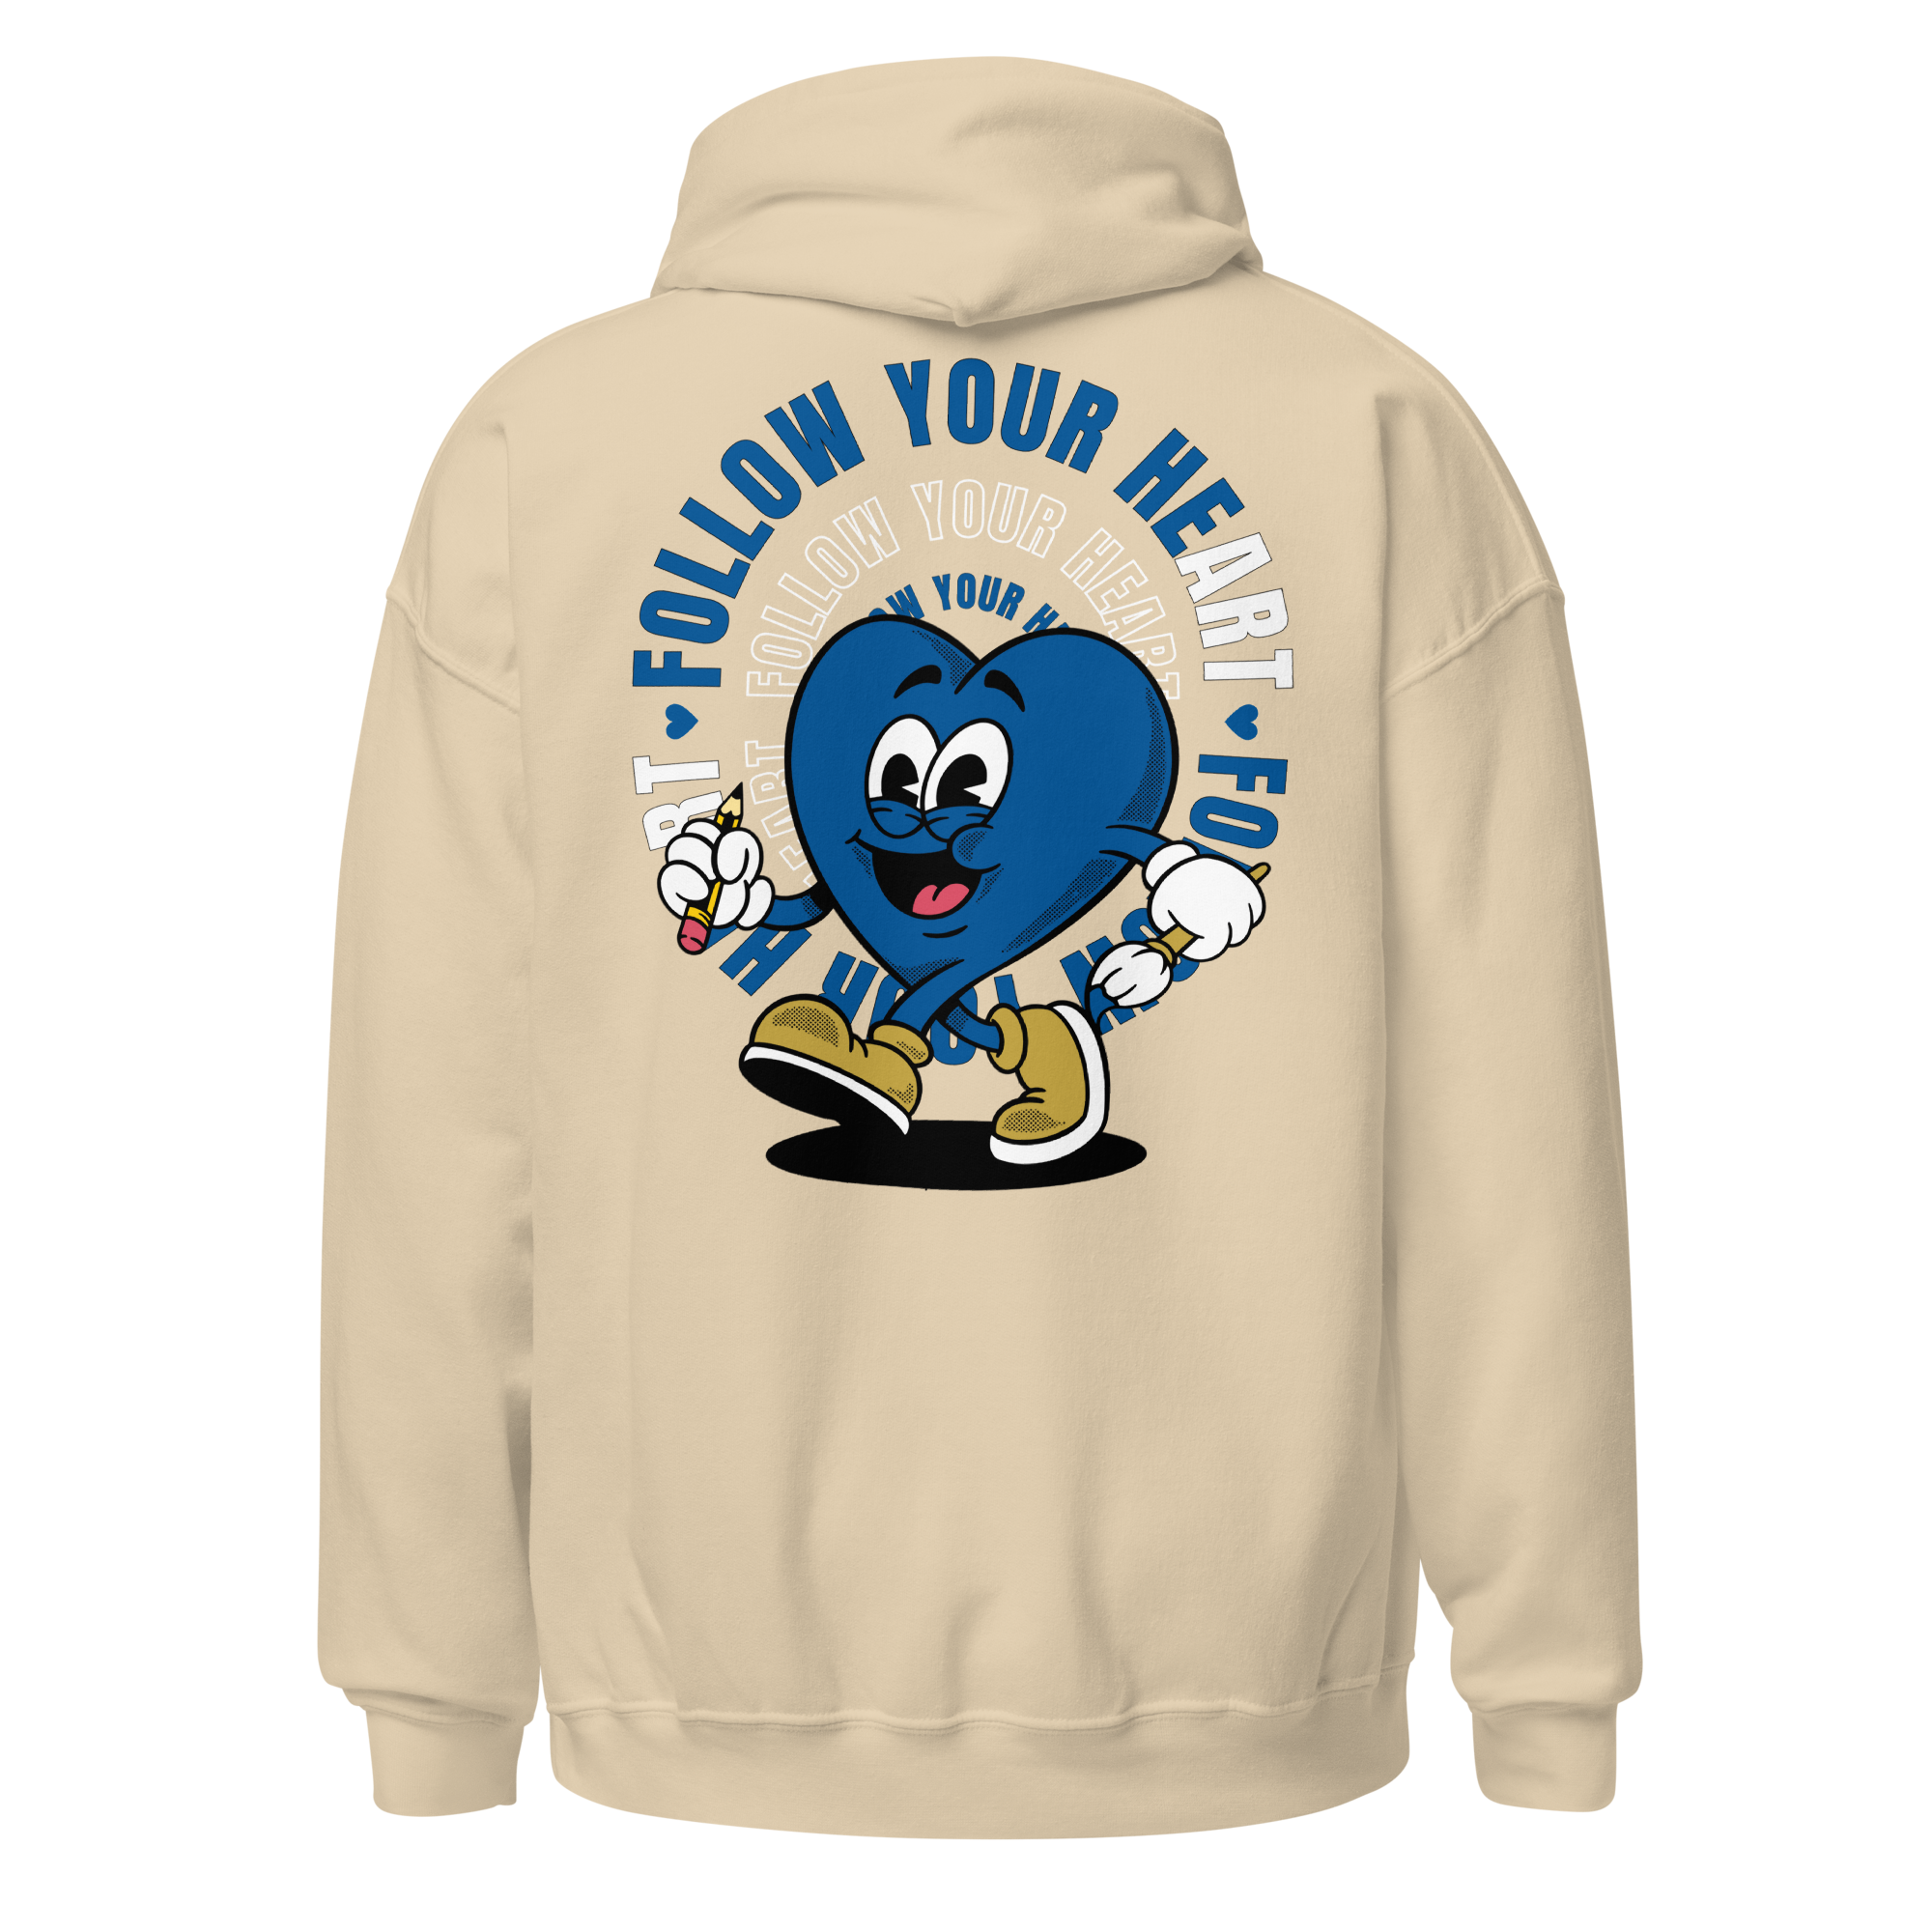 Follow Your Heart Embroidery Hoodie - Blue and Tan (Unisex)